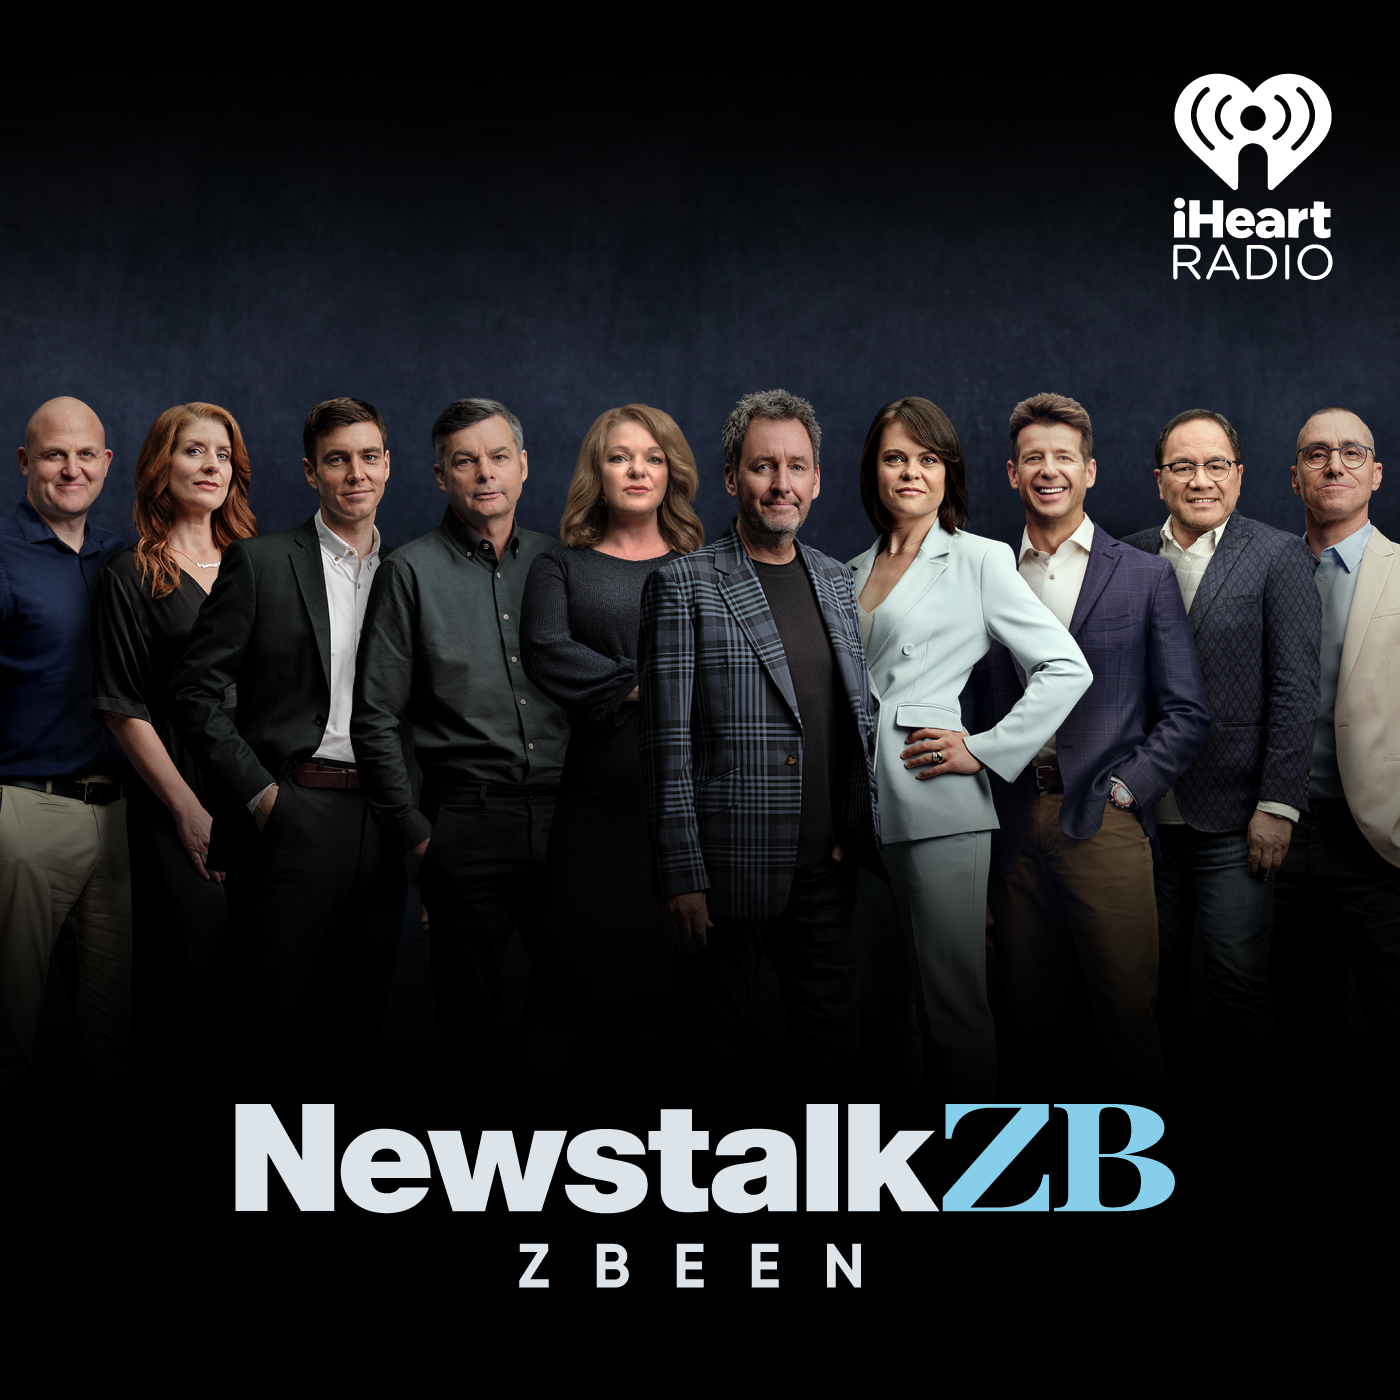 NEWSTALK ZBEEN: The Usual Old Moan